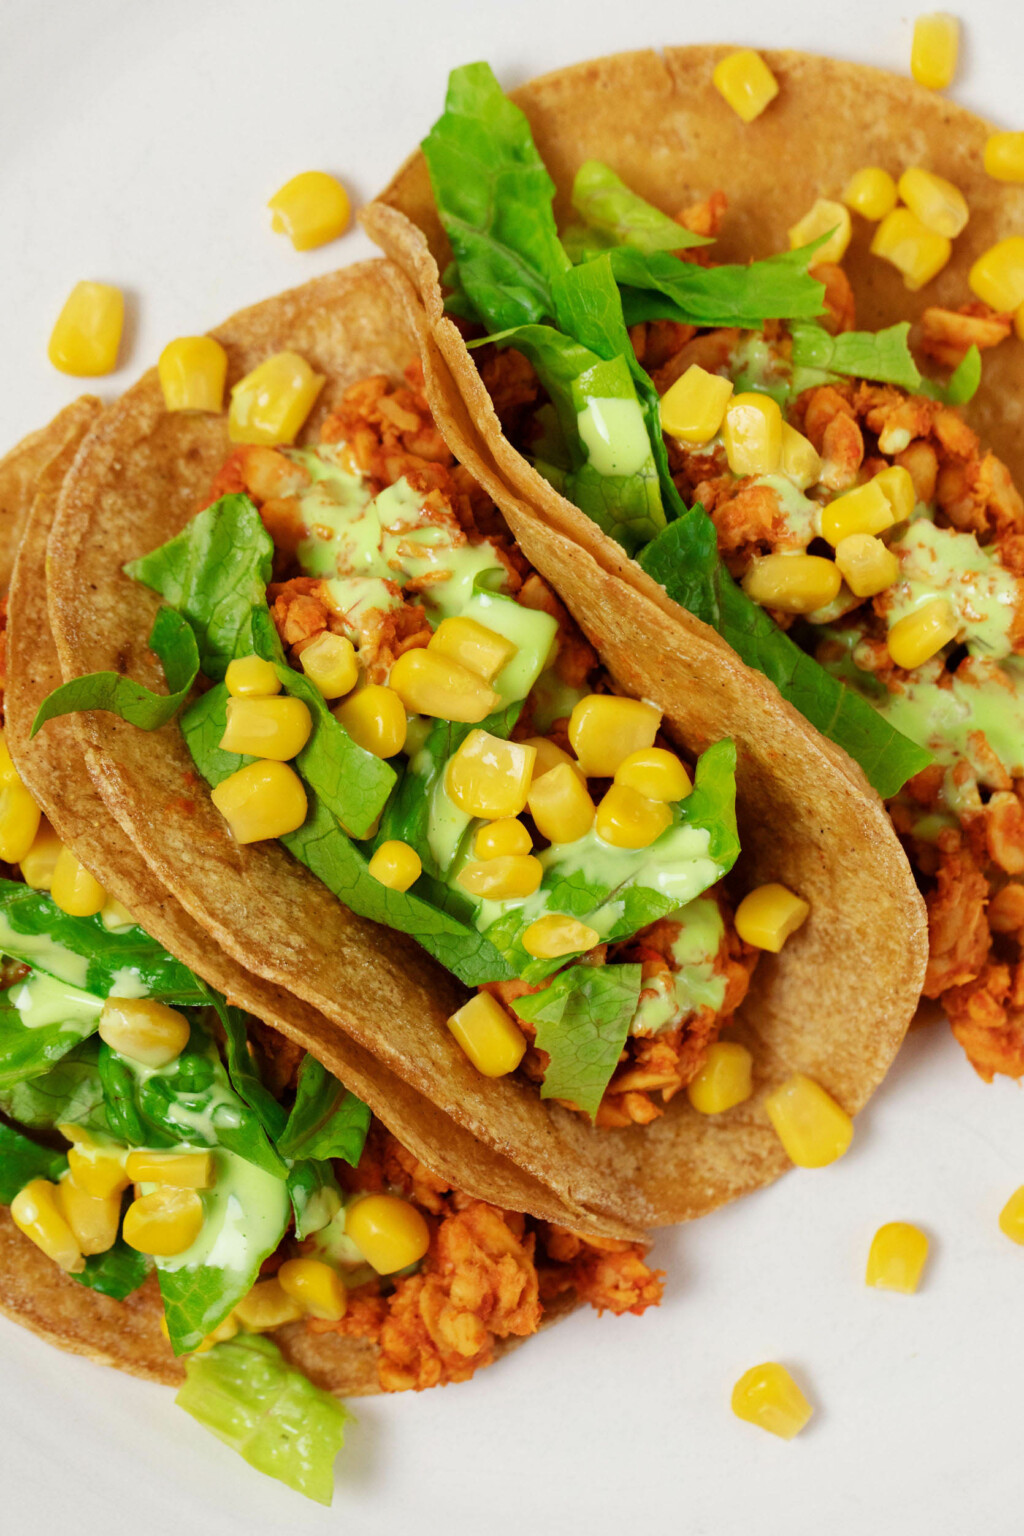 An overhead image of vegan tempeh tacos with corn, lettuce, and a creamy dressing.